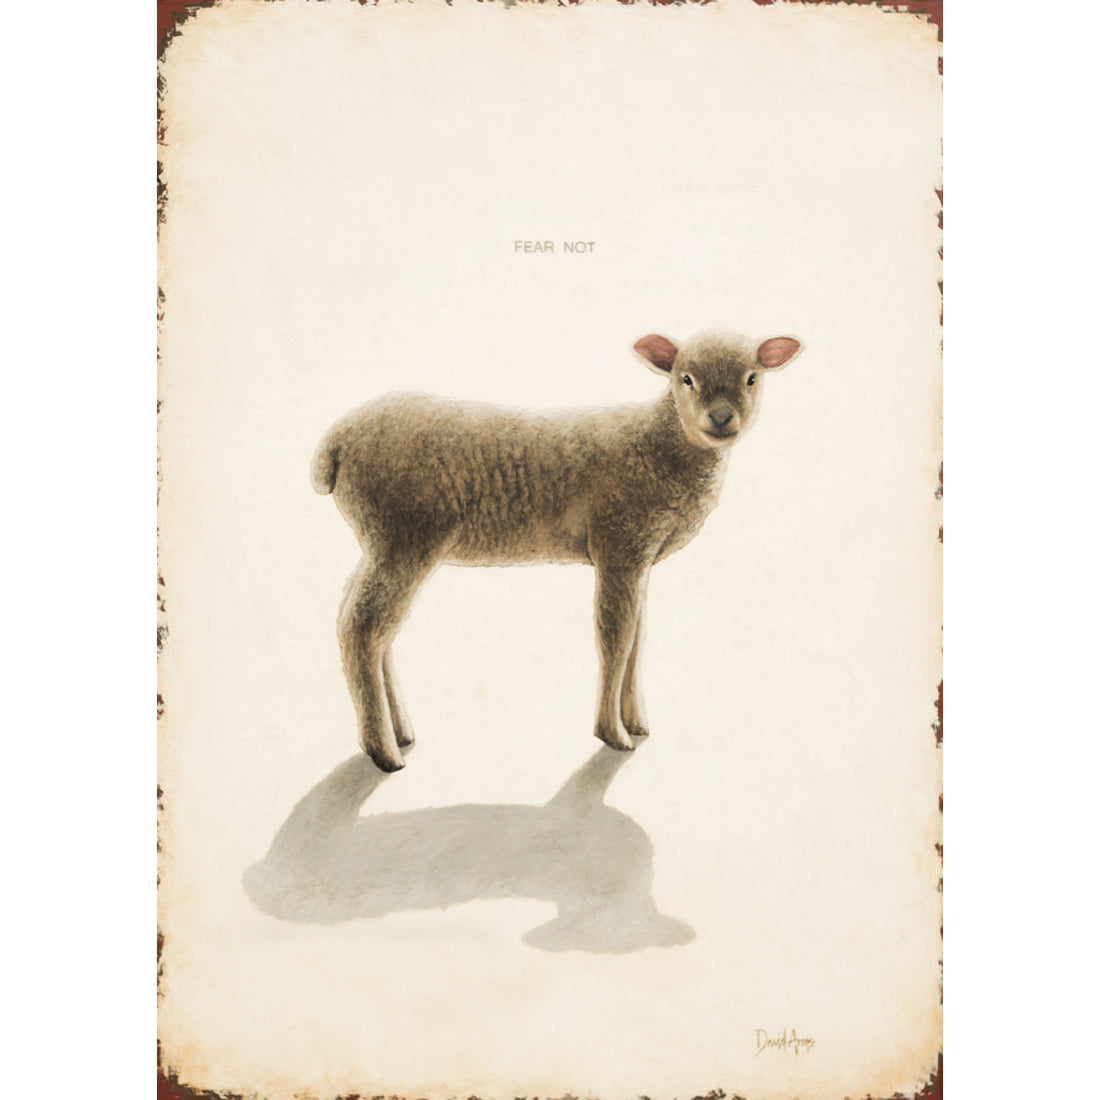 An illustration of a realistic lamb on a tan background with &quot;FEAR NOT&quot; printed in small text above the lamb.